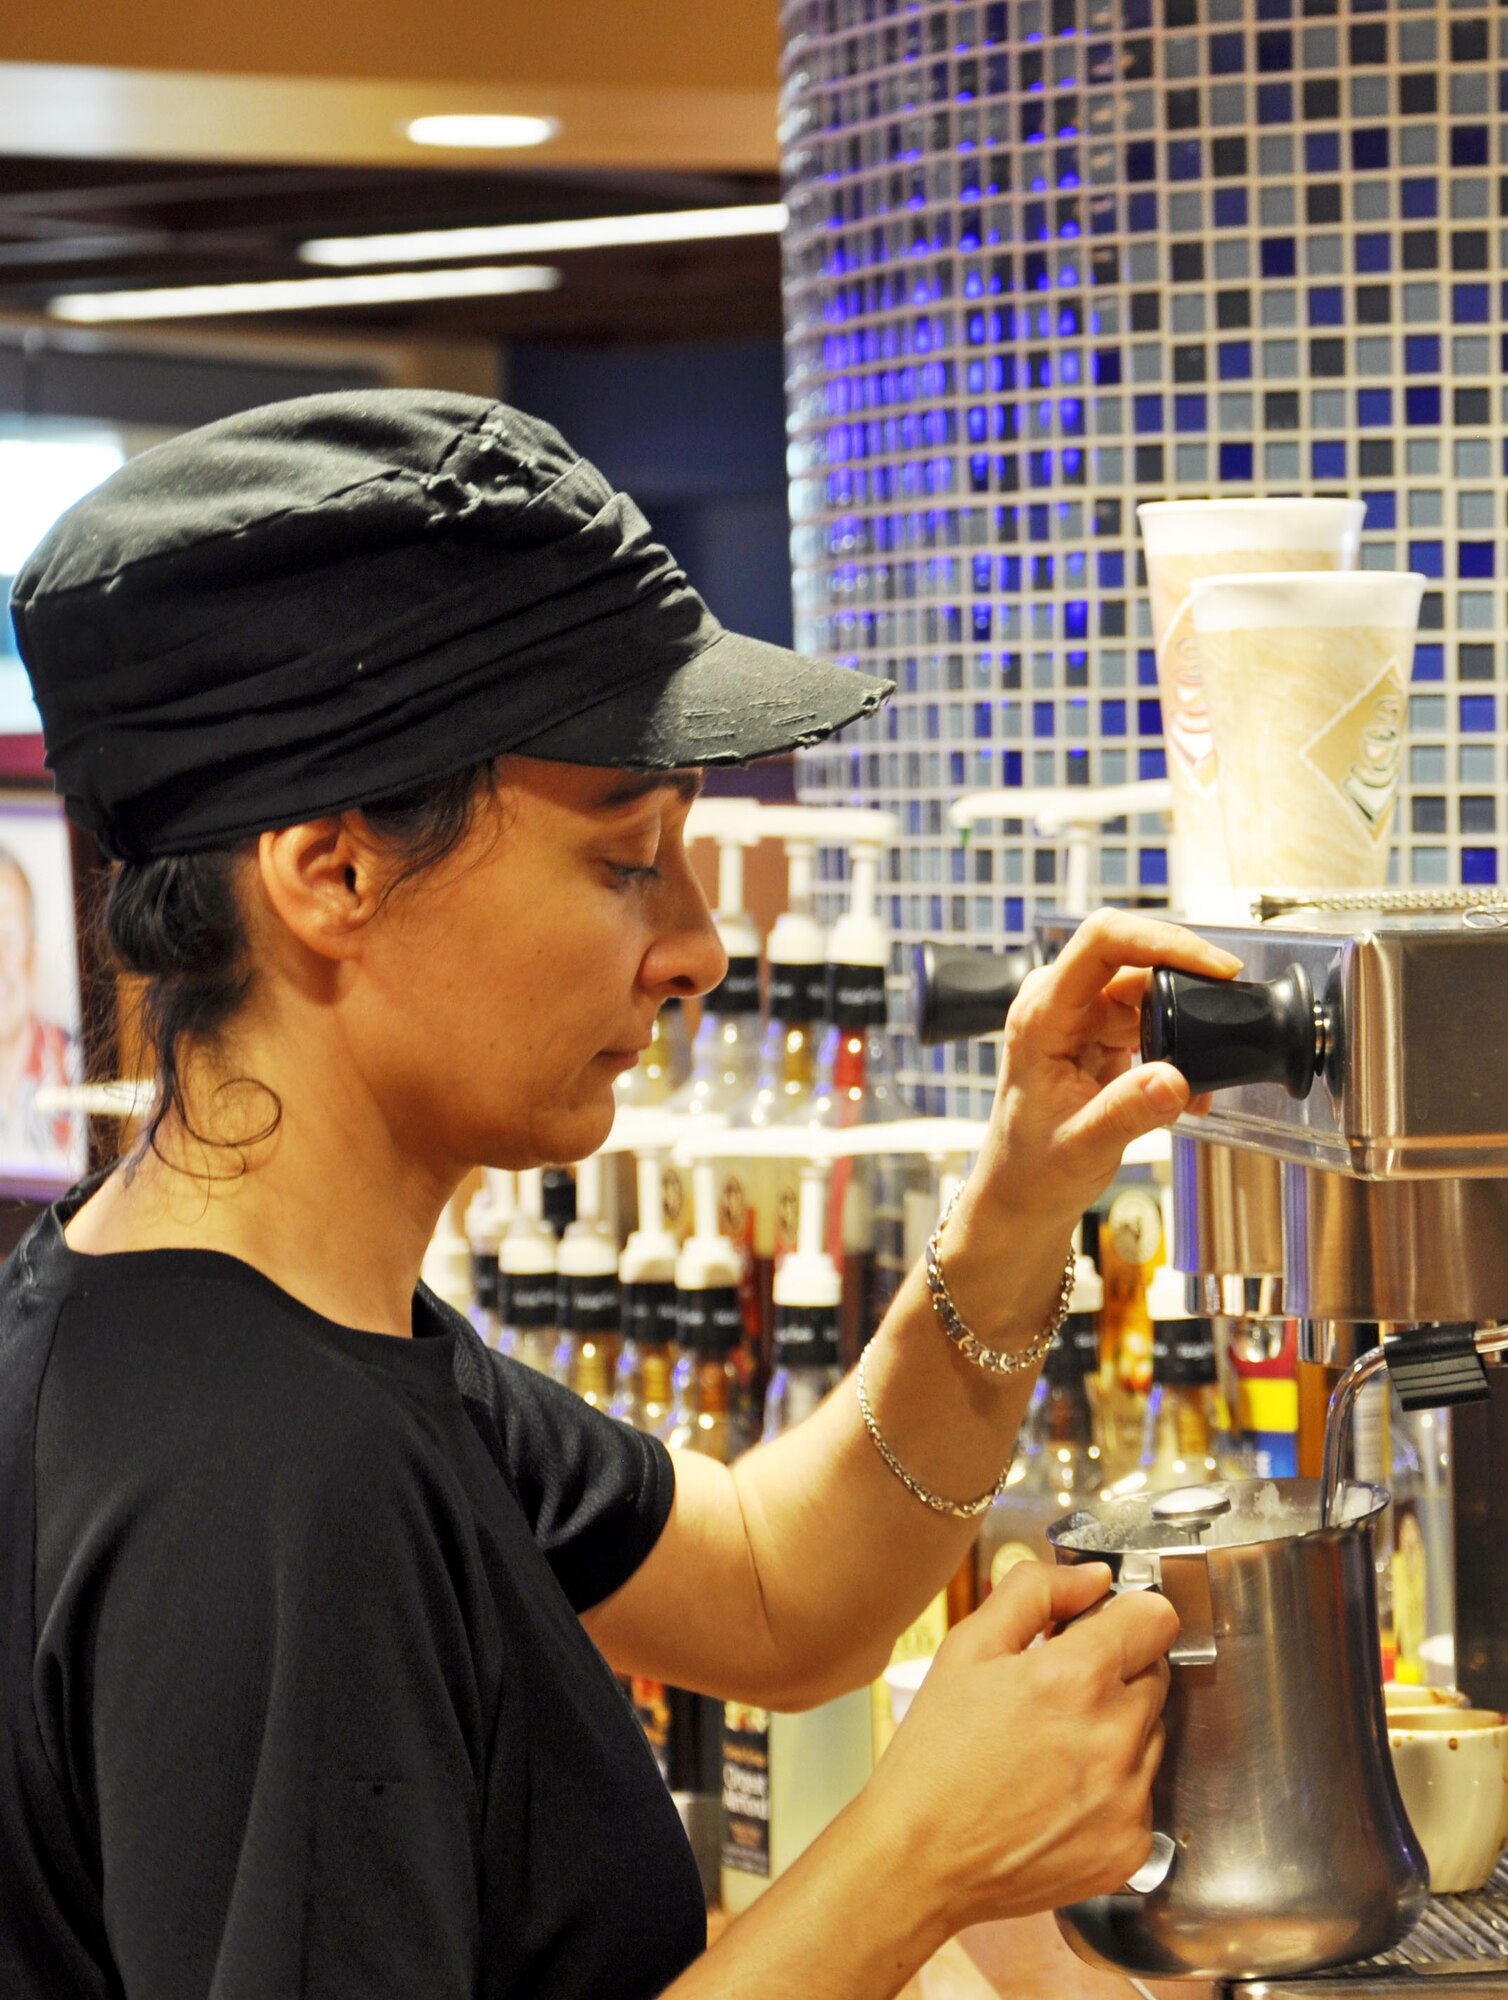 Asli Stewart, native of Turkey and a 5-year barista at St. Louis Coffee Roasters, steams milk for a customer March 20, 2012, at Scott Air Force Base, Ill. St. Louis Coffee Roasters is located at the Global Reach Grill on the first floor of Air Mobility Command Headquarters.(U.S. Air Force photo/Theo Ramsey)